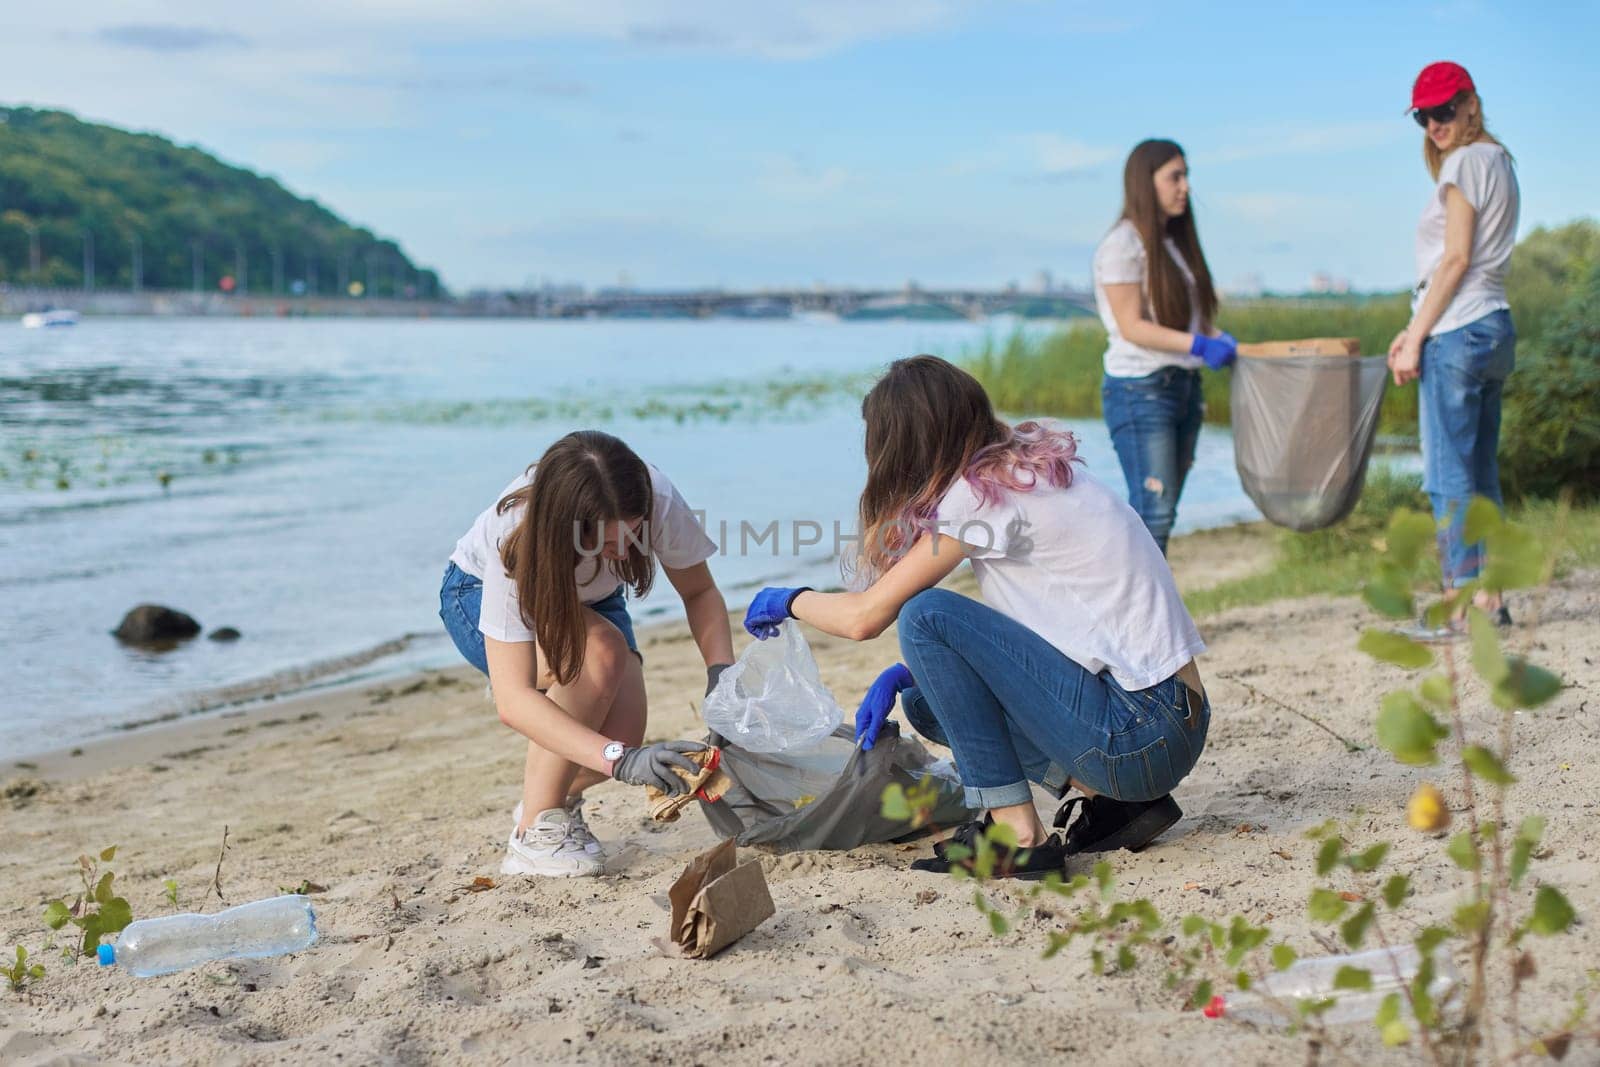 Group of students with teacher in nature doing cleaning of plastic garbage. Environmental protection, youth, volunteering, charity, and ecology concept